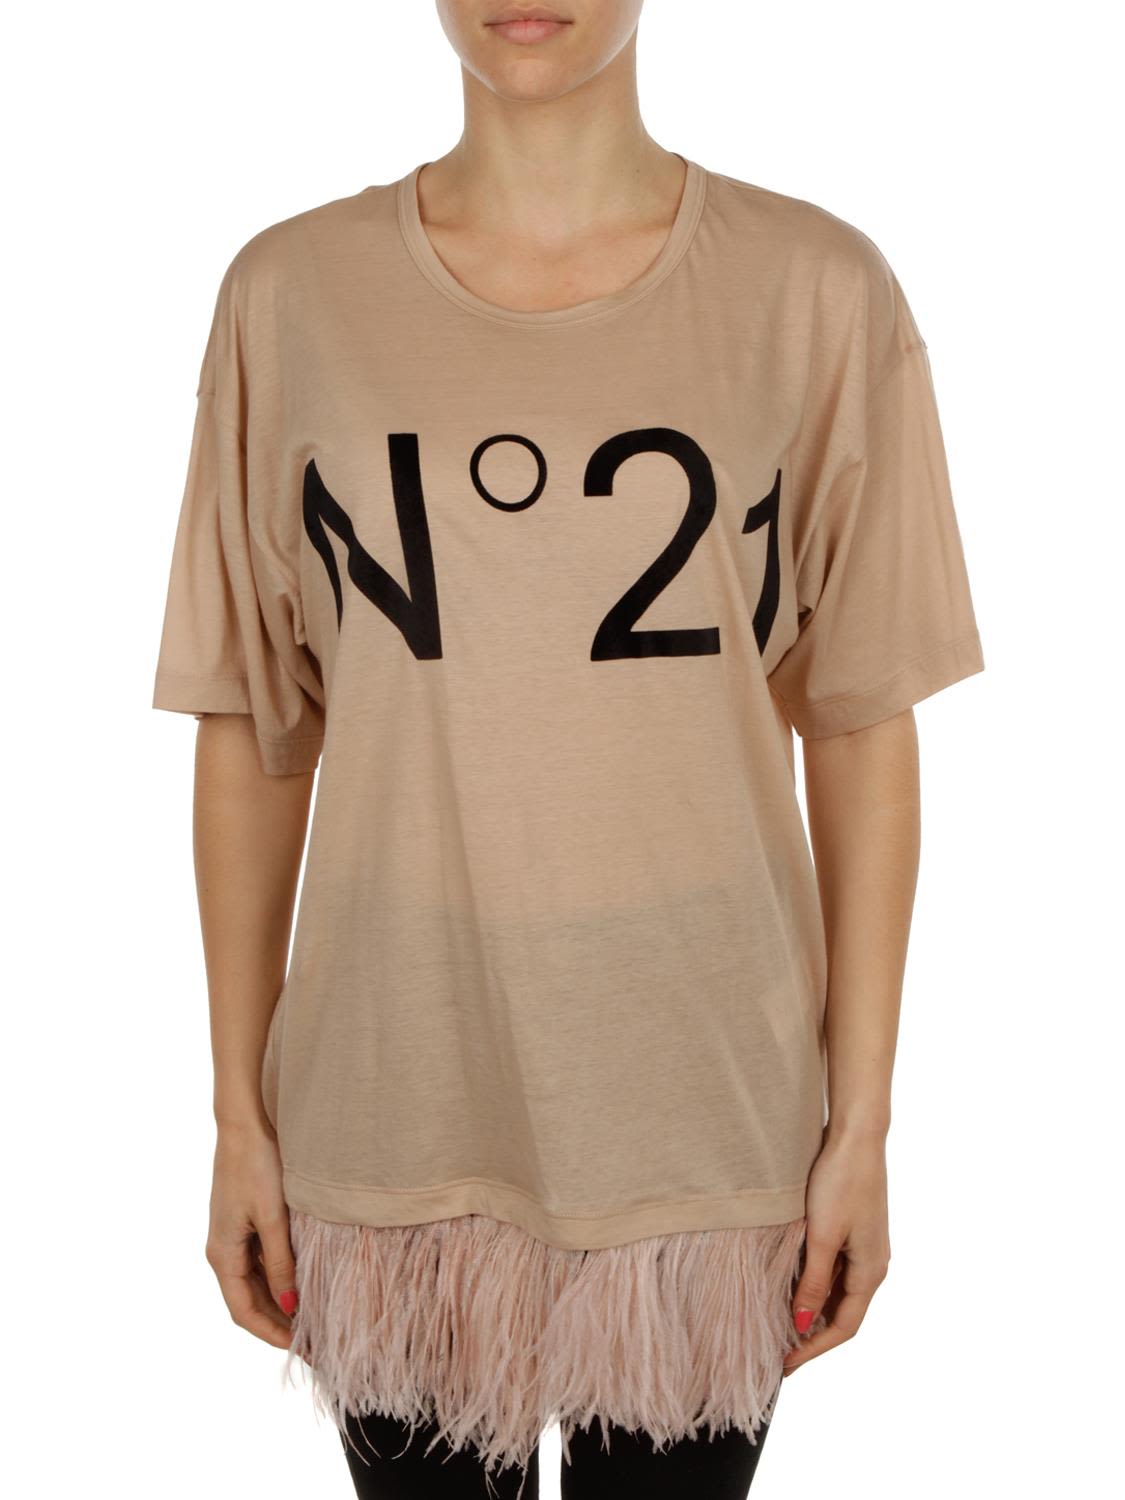 N°21 COTTON T-SHIRT WITH FEATHERS DETAIL,10606034